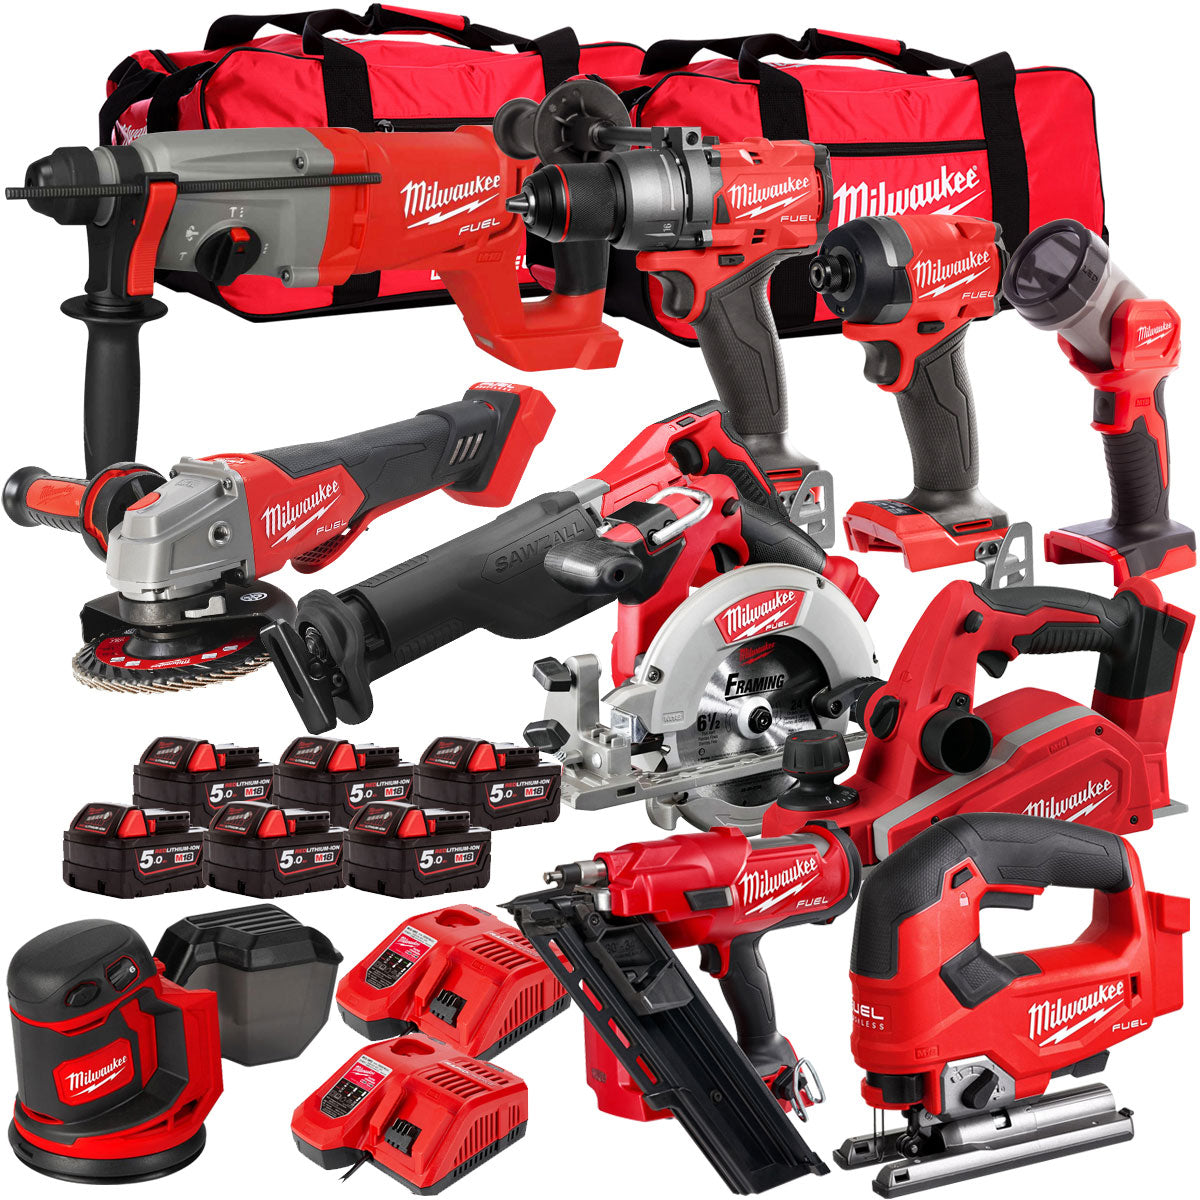 Milwaukee 18V Cordless 11 Piece Tool Kit with 6 x 5.0Ah Batteries & Charger in Bag T4TKIT-515